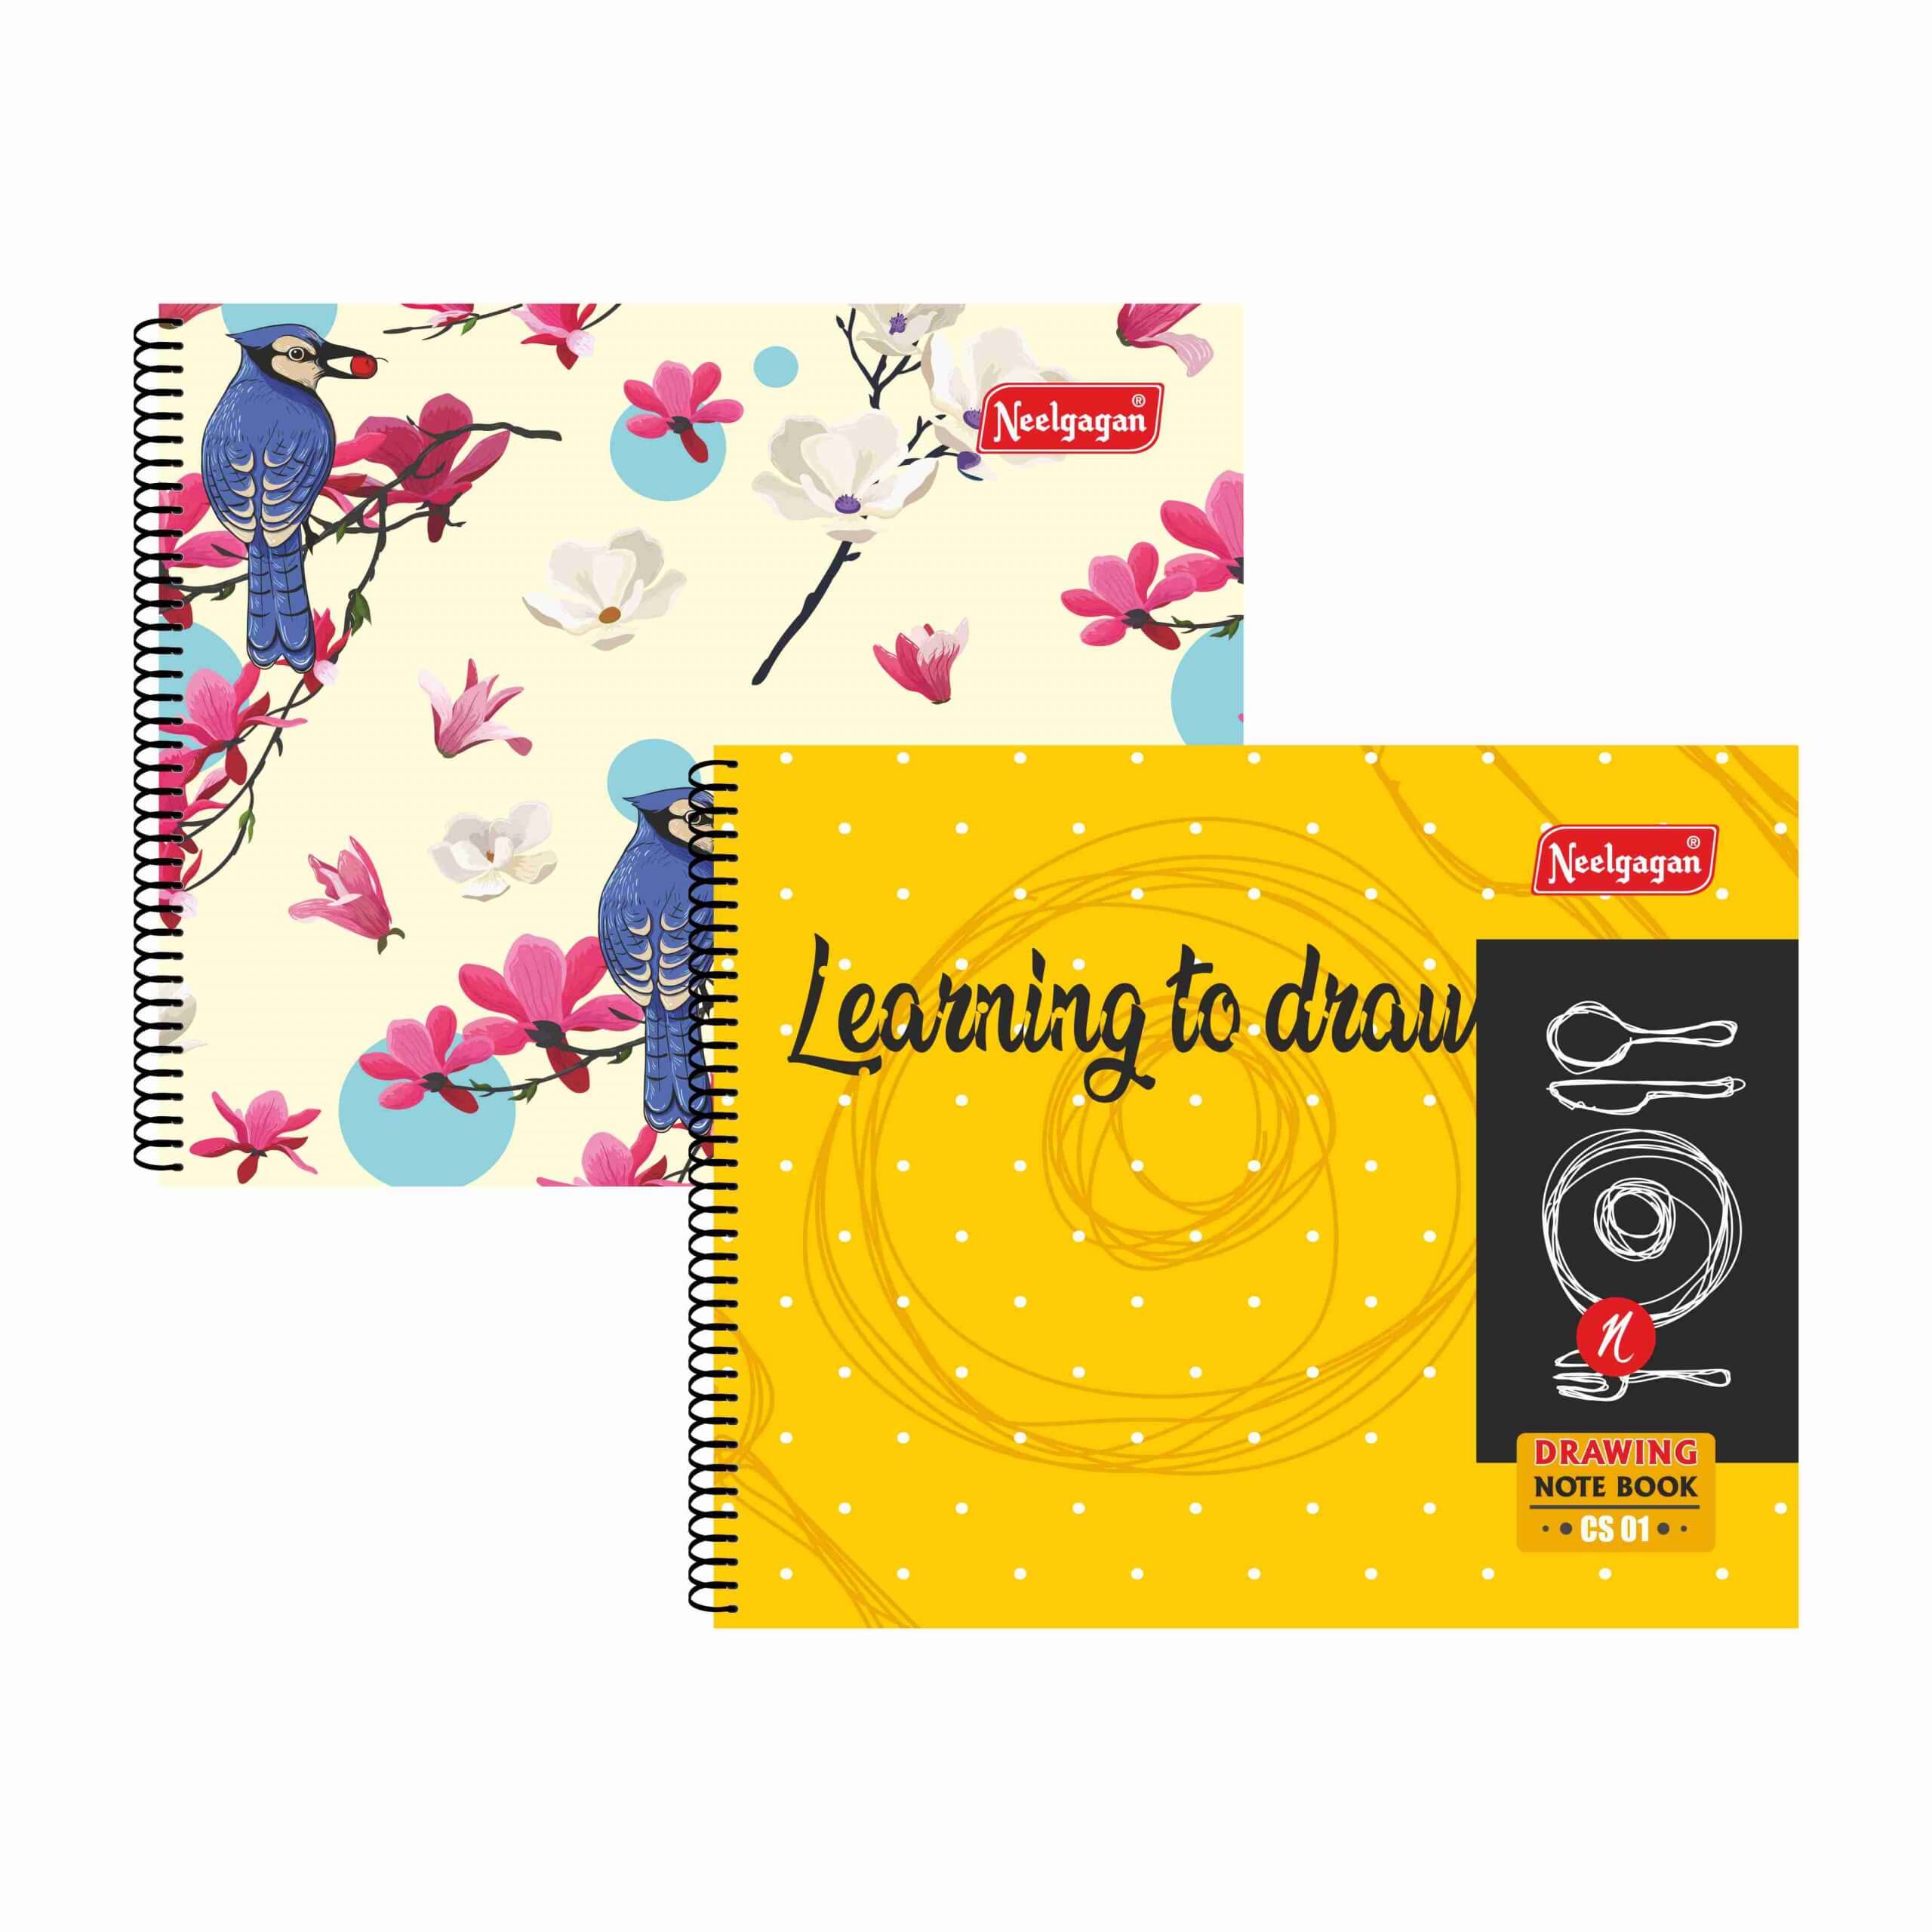 Crafty Drawing Book CS 01 (26.5cm X 21.5cm) Spiral Bound (Suitable for Drawing & Sketching)